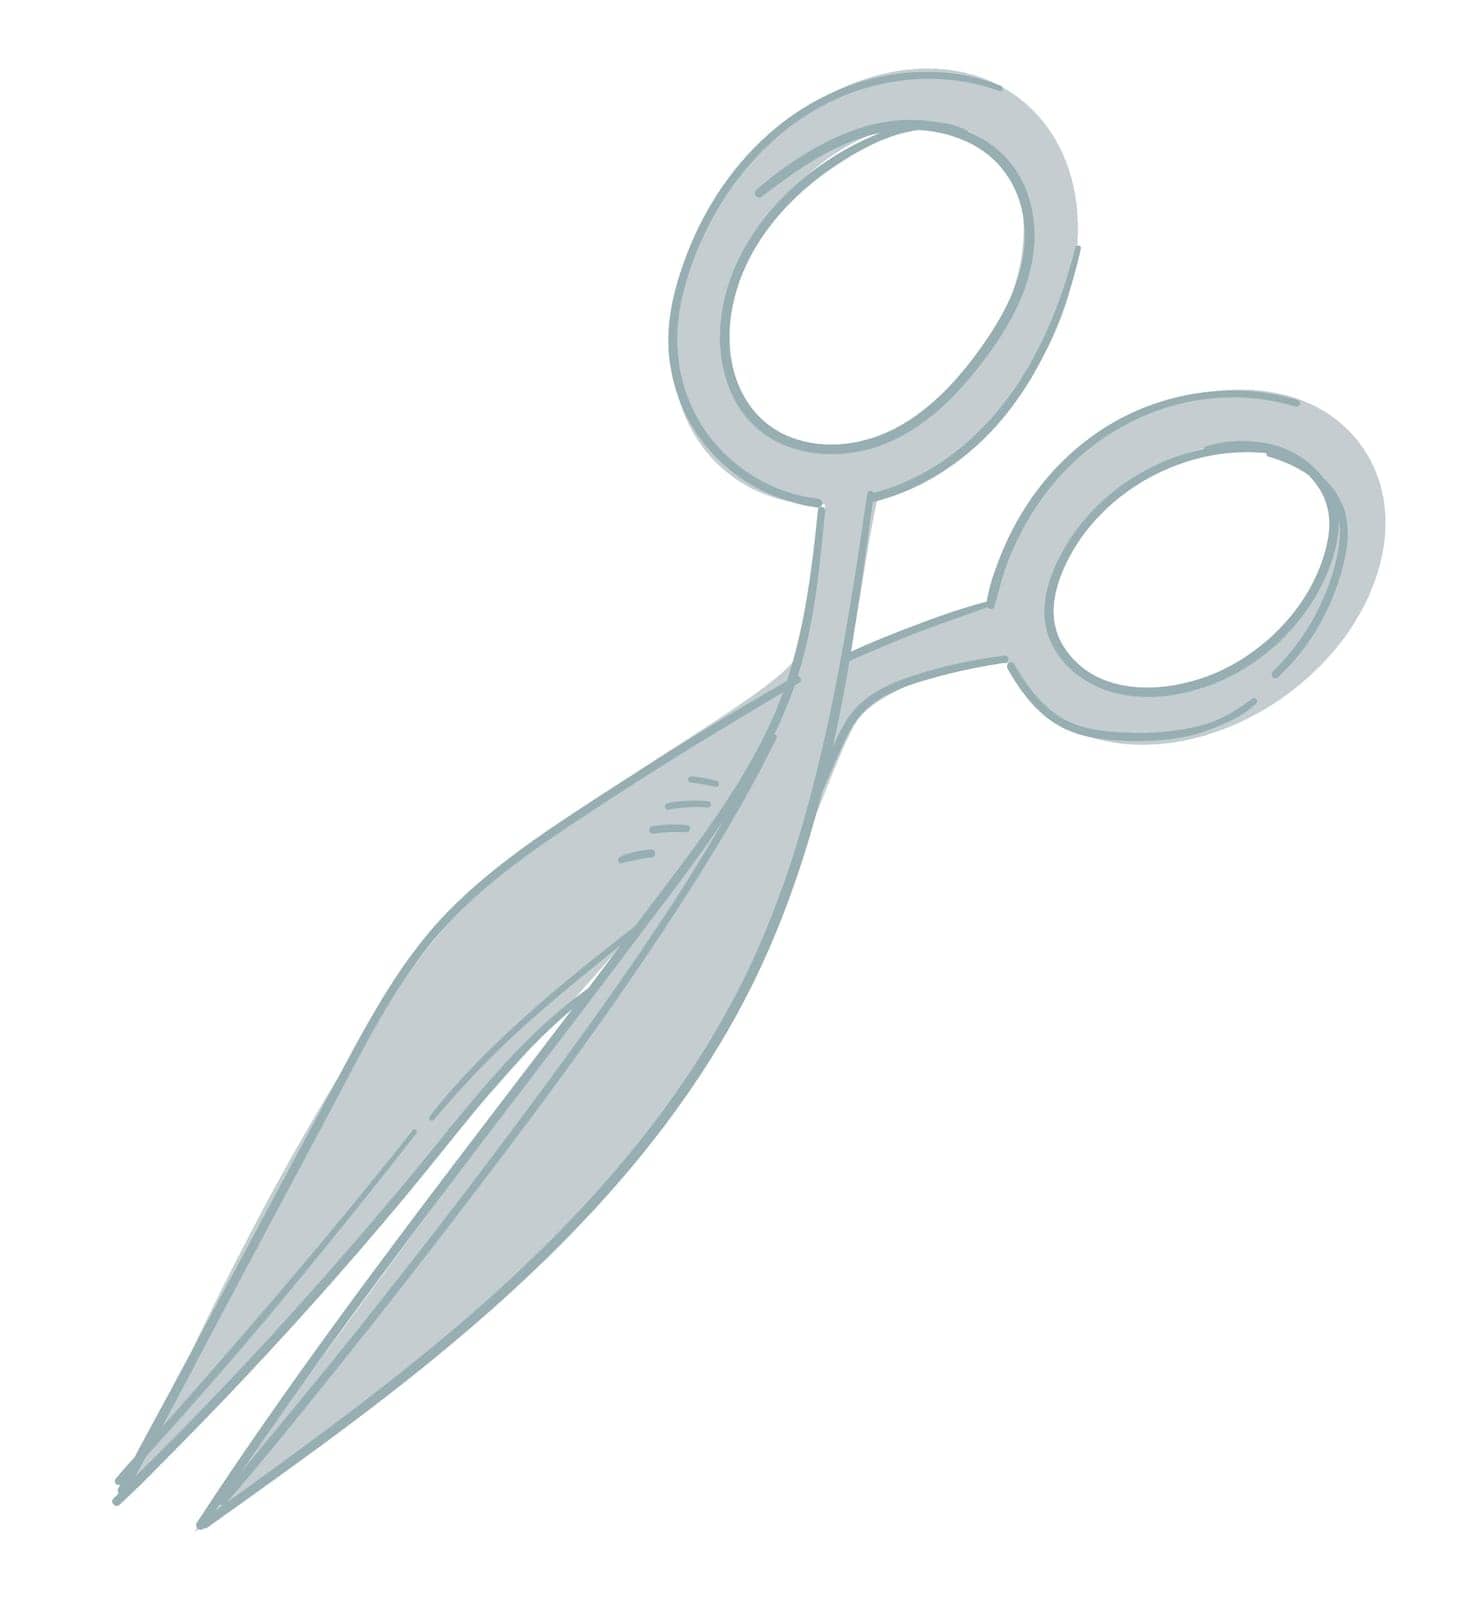 Tool with sharp blade, isolated scissors for cutting in half. Symbol of workshop or handmade products, steel instruments for work or creative classes. Stationery in office. Vector in flat style